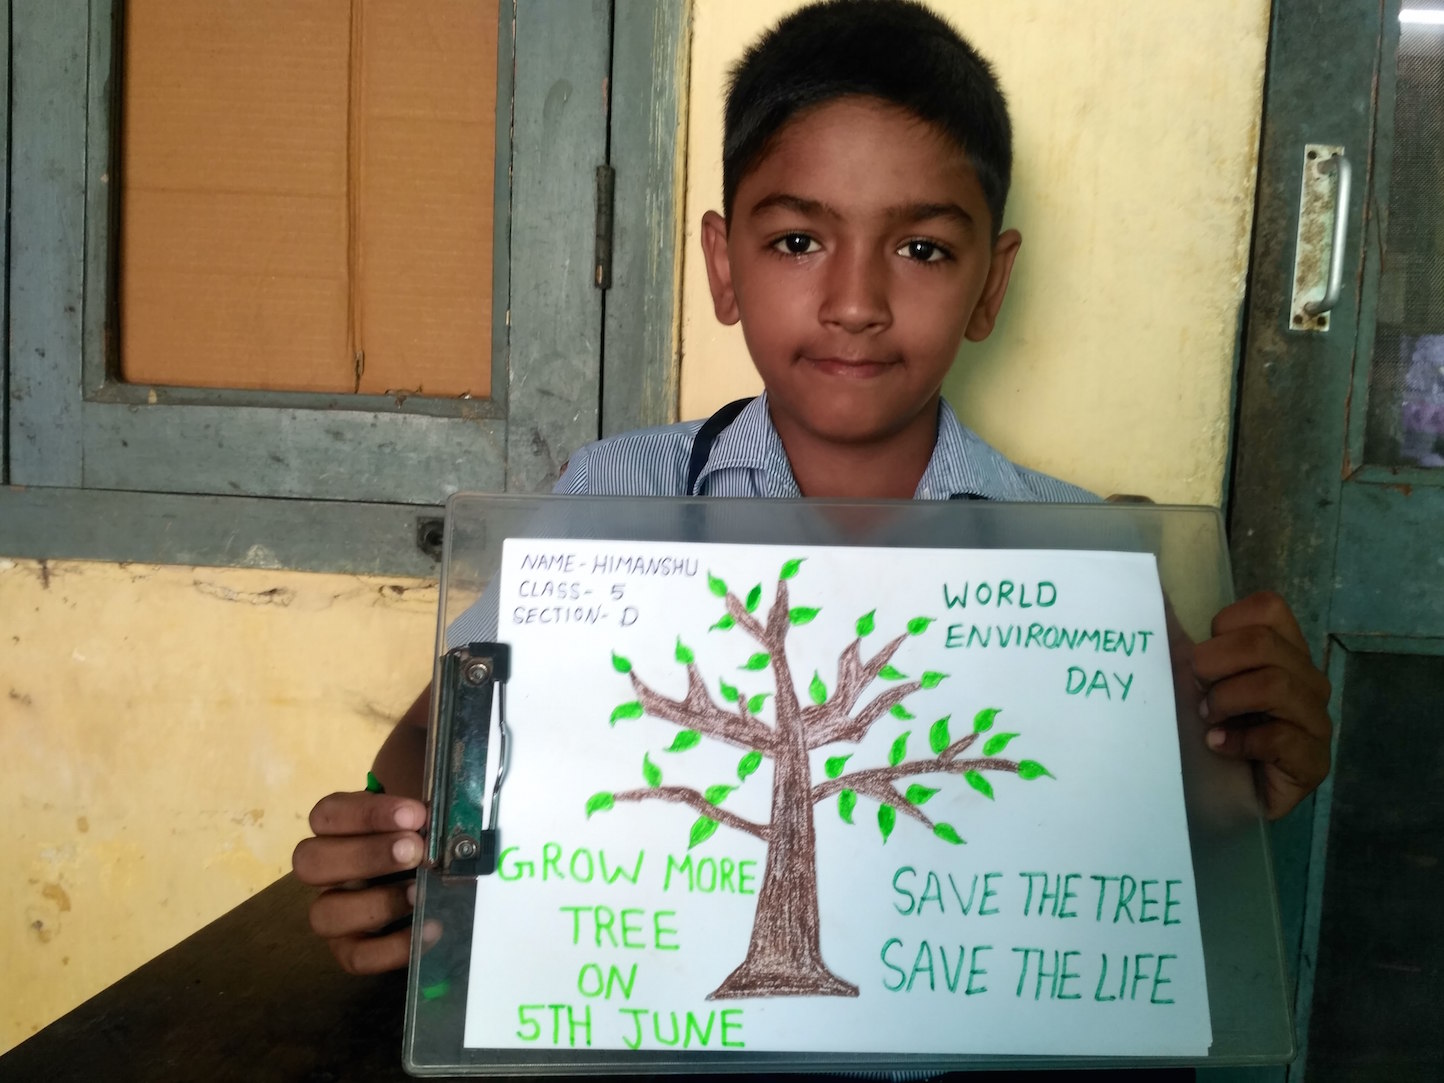 Save the tree, save the life | Curious Times